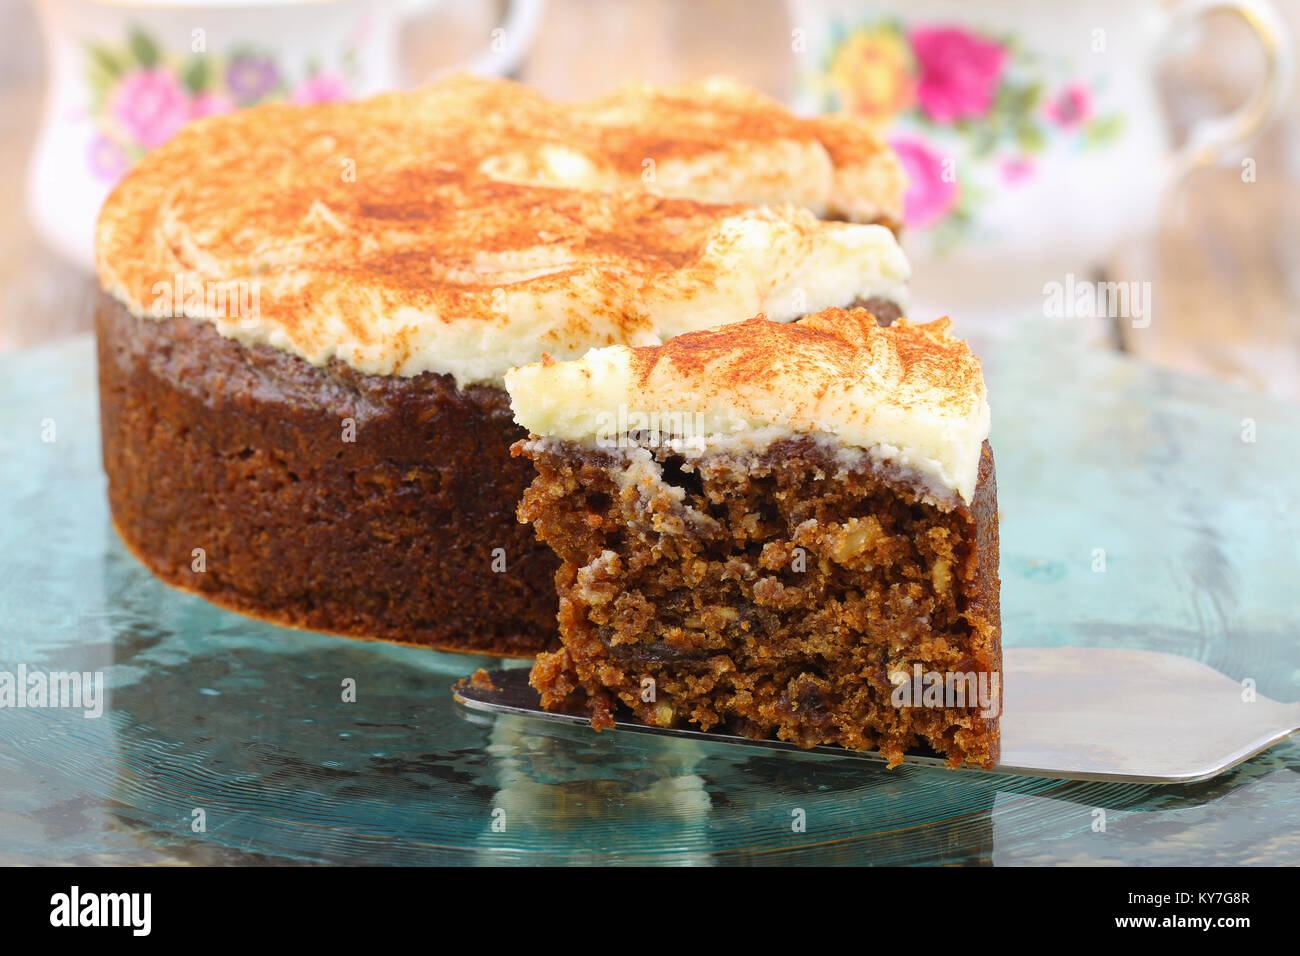 Slice of delicious carrot cake with walnuts with marzipan icing Stock Photo